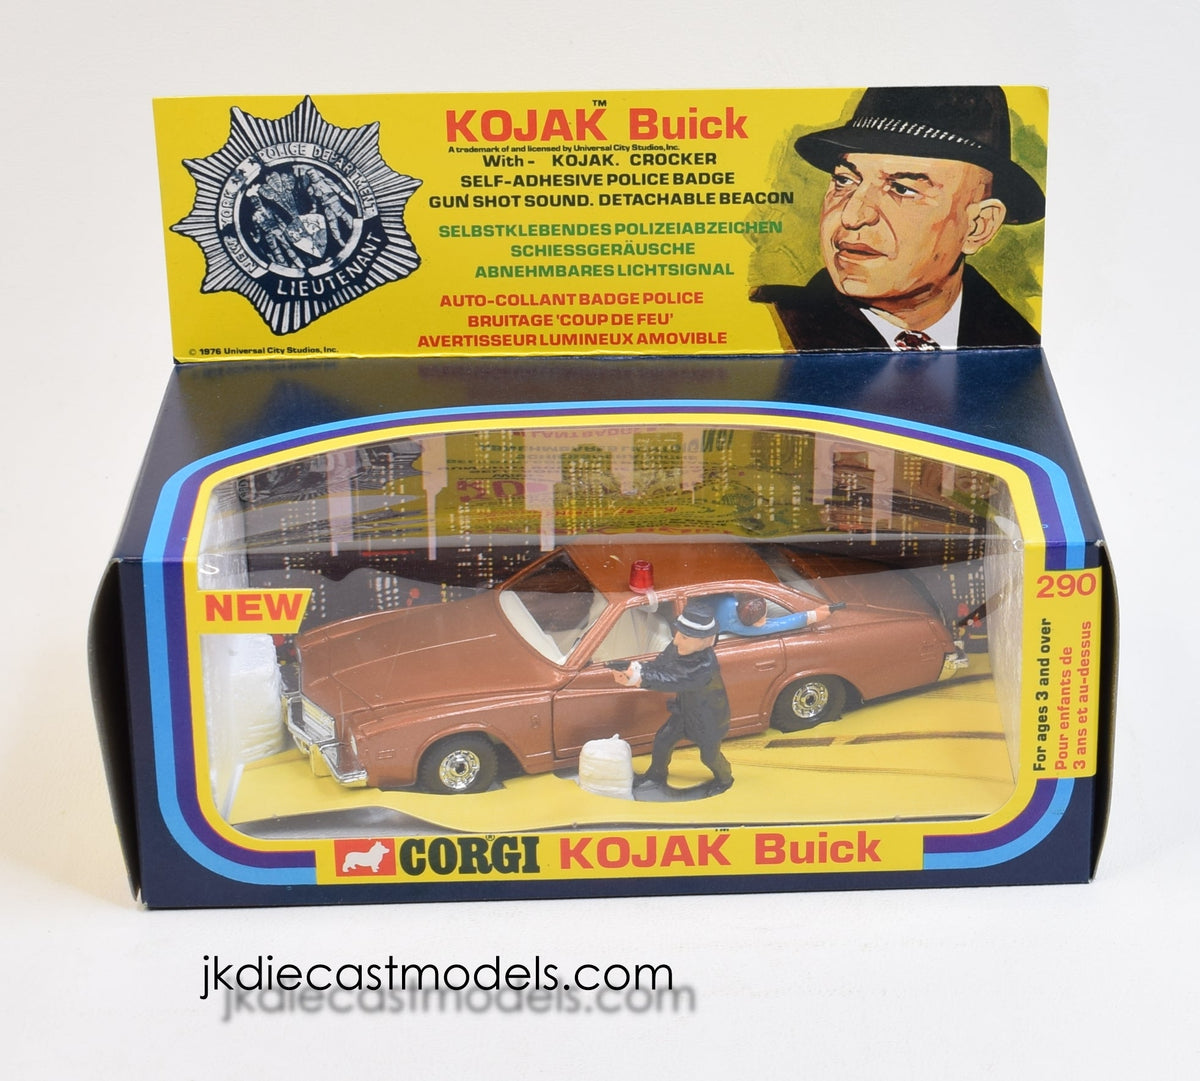 Corgi Toys 290 Kojak Buick  Mint/Lovely box (Straight out of a trade wrap, 1 of 5 available)